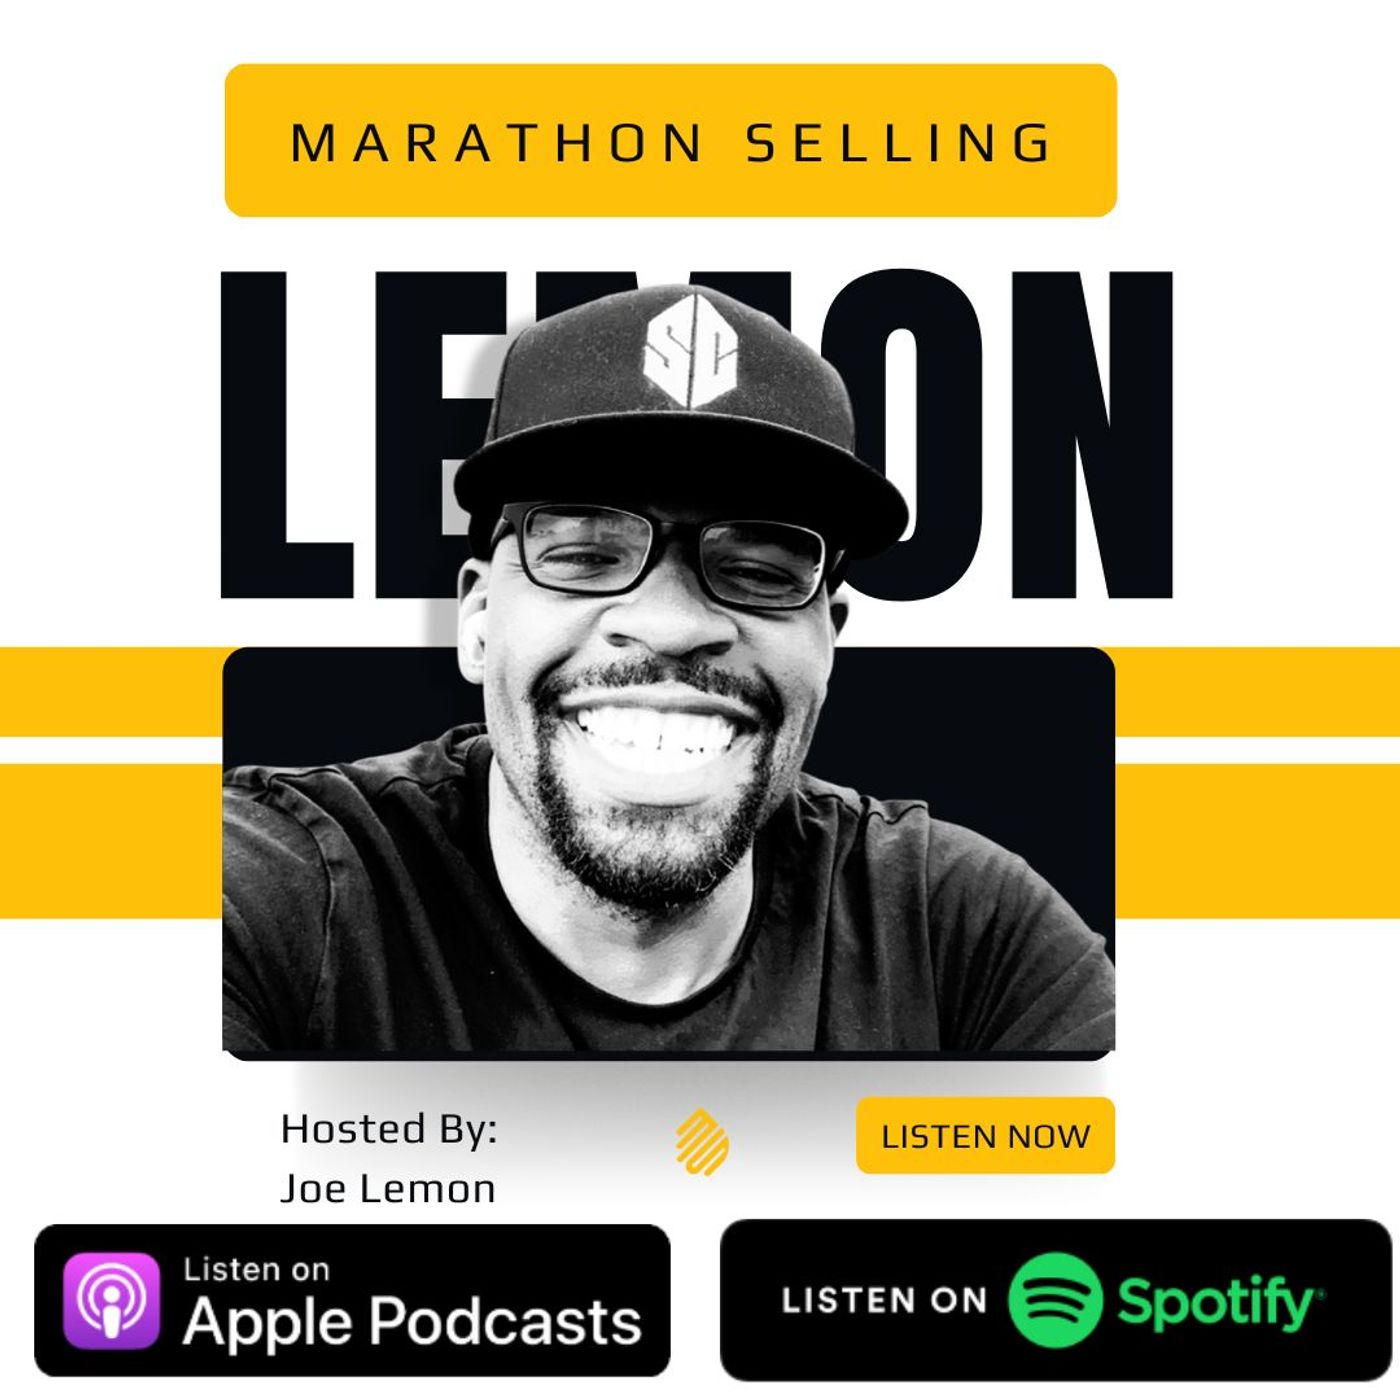 001. Pure Capitalist Economy, Control the Controllables #MarathonSelling